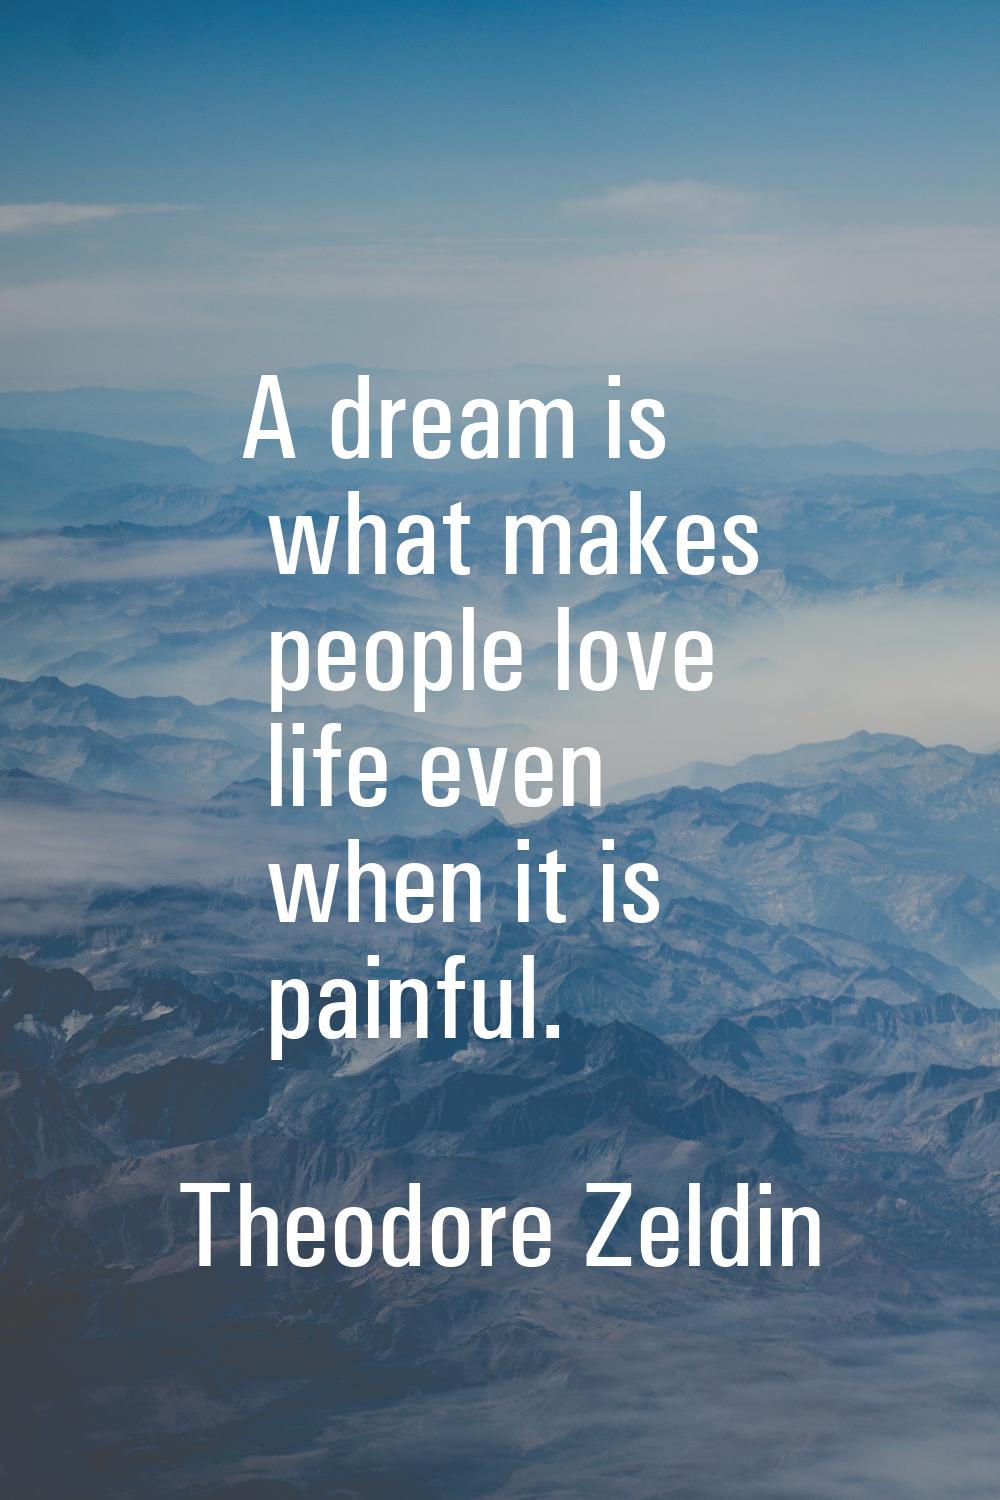 A dream is what makes people love life even when it is painful.